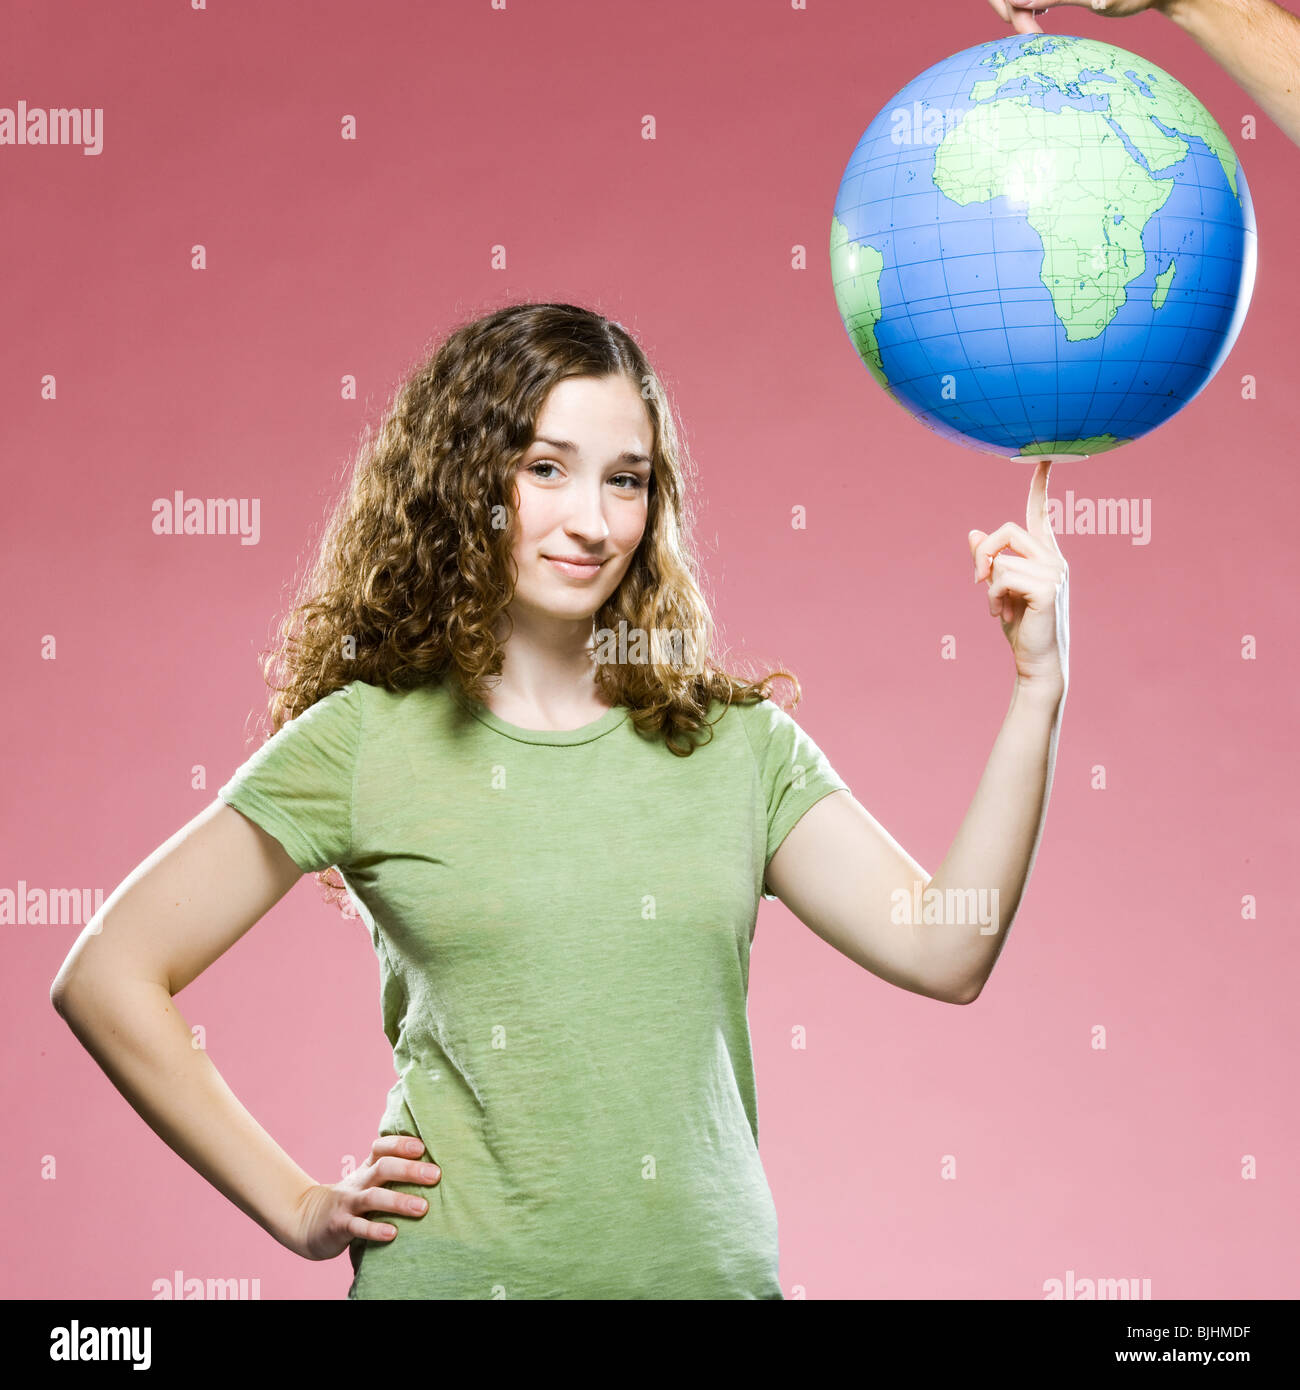 woman spinning a world globe on her finger like a basketball Stock Photo